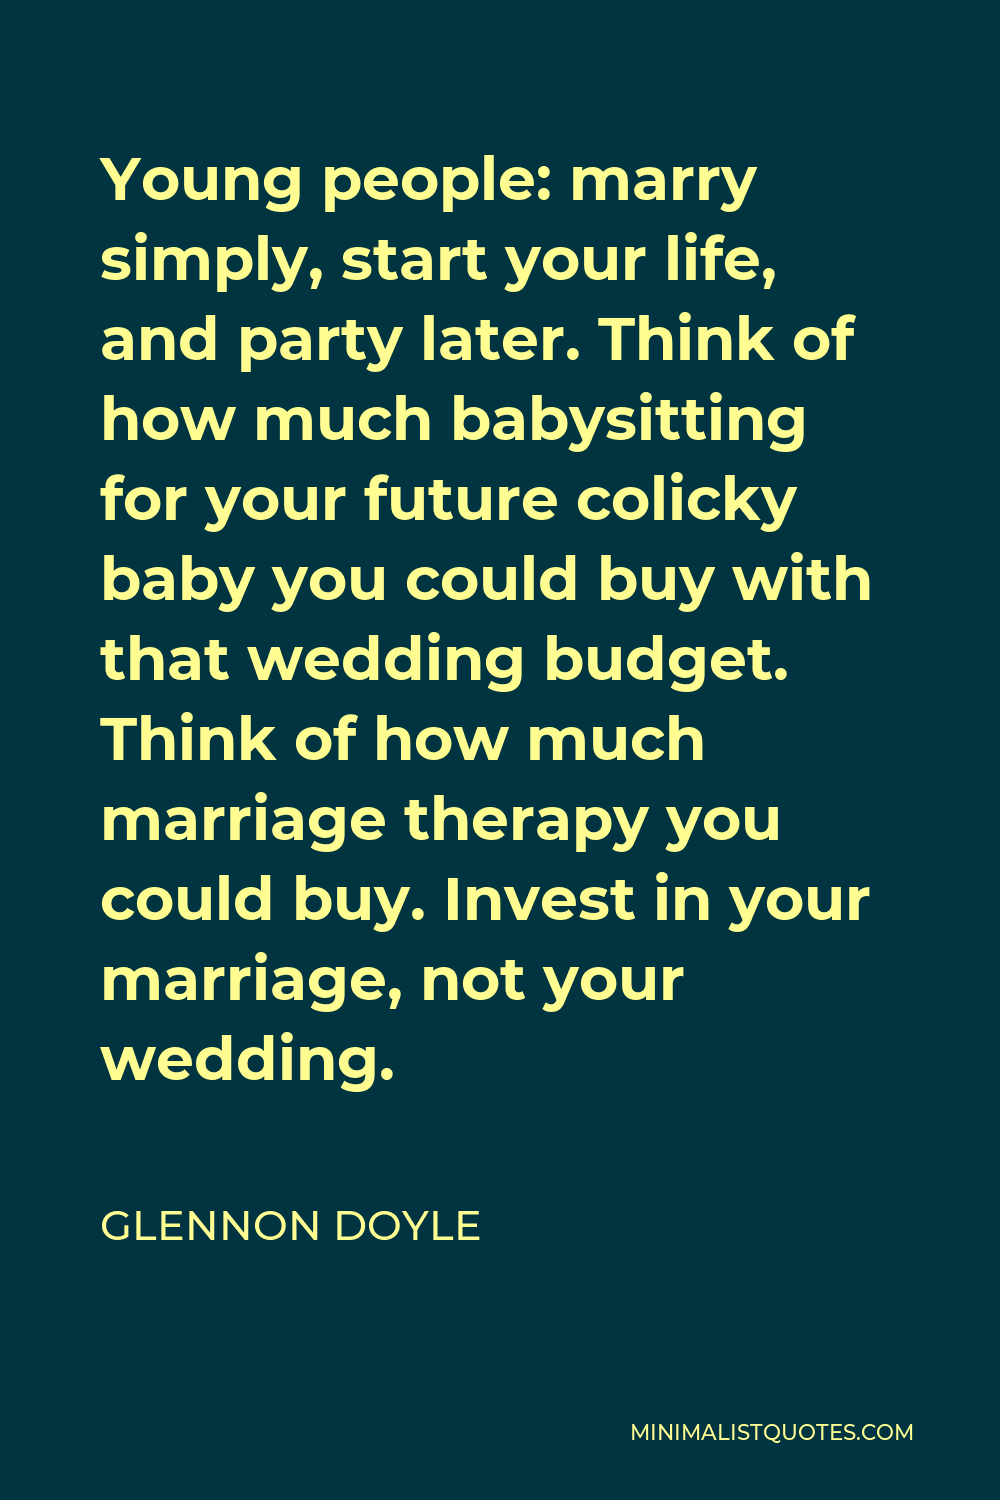 Glennon Doyle Quote - Young people: marry simply, start your life, and party later. Think of how much babysitting for your future colicky baby you could buy with that wedding budget. Think of how much marriage therapy you could buy. Invest in your marriage, not your wedding.